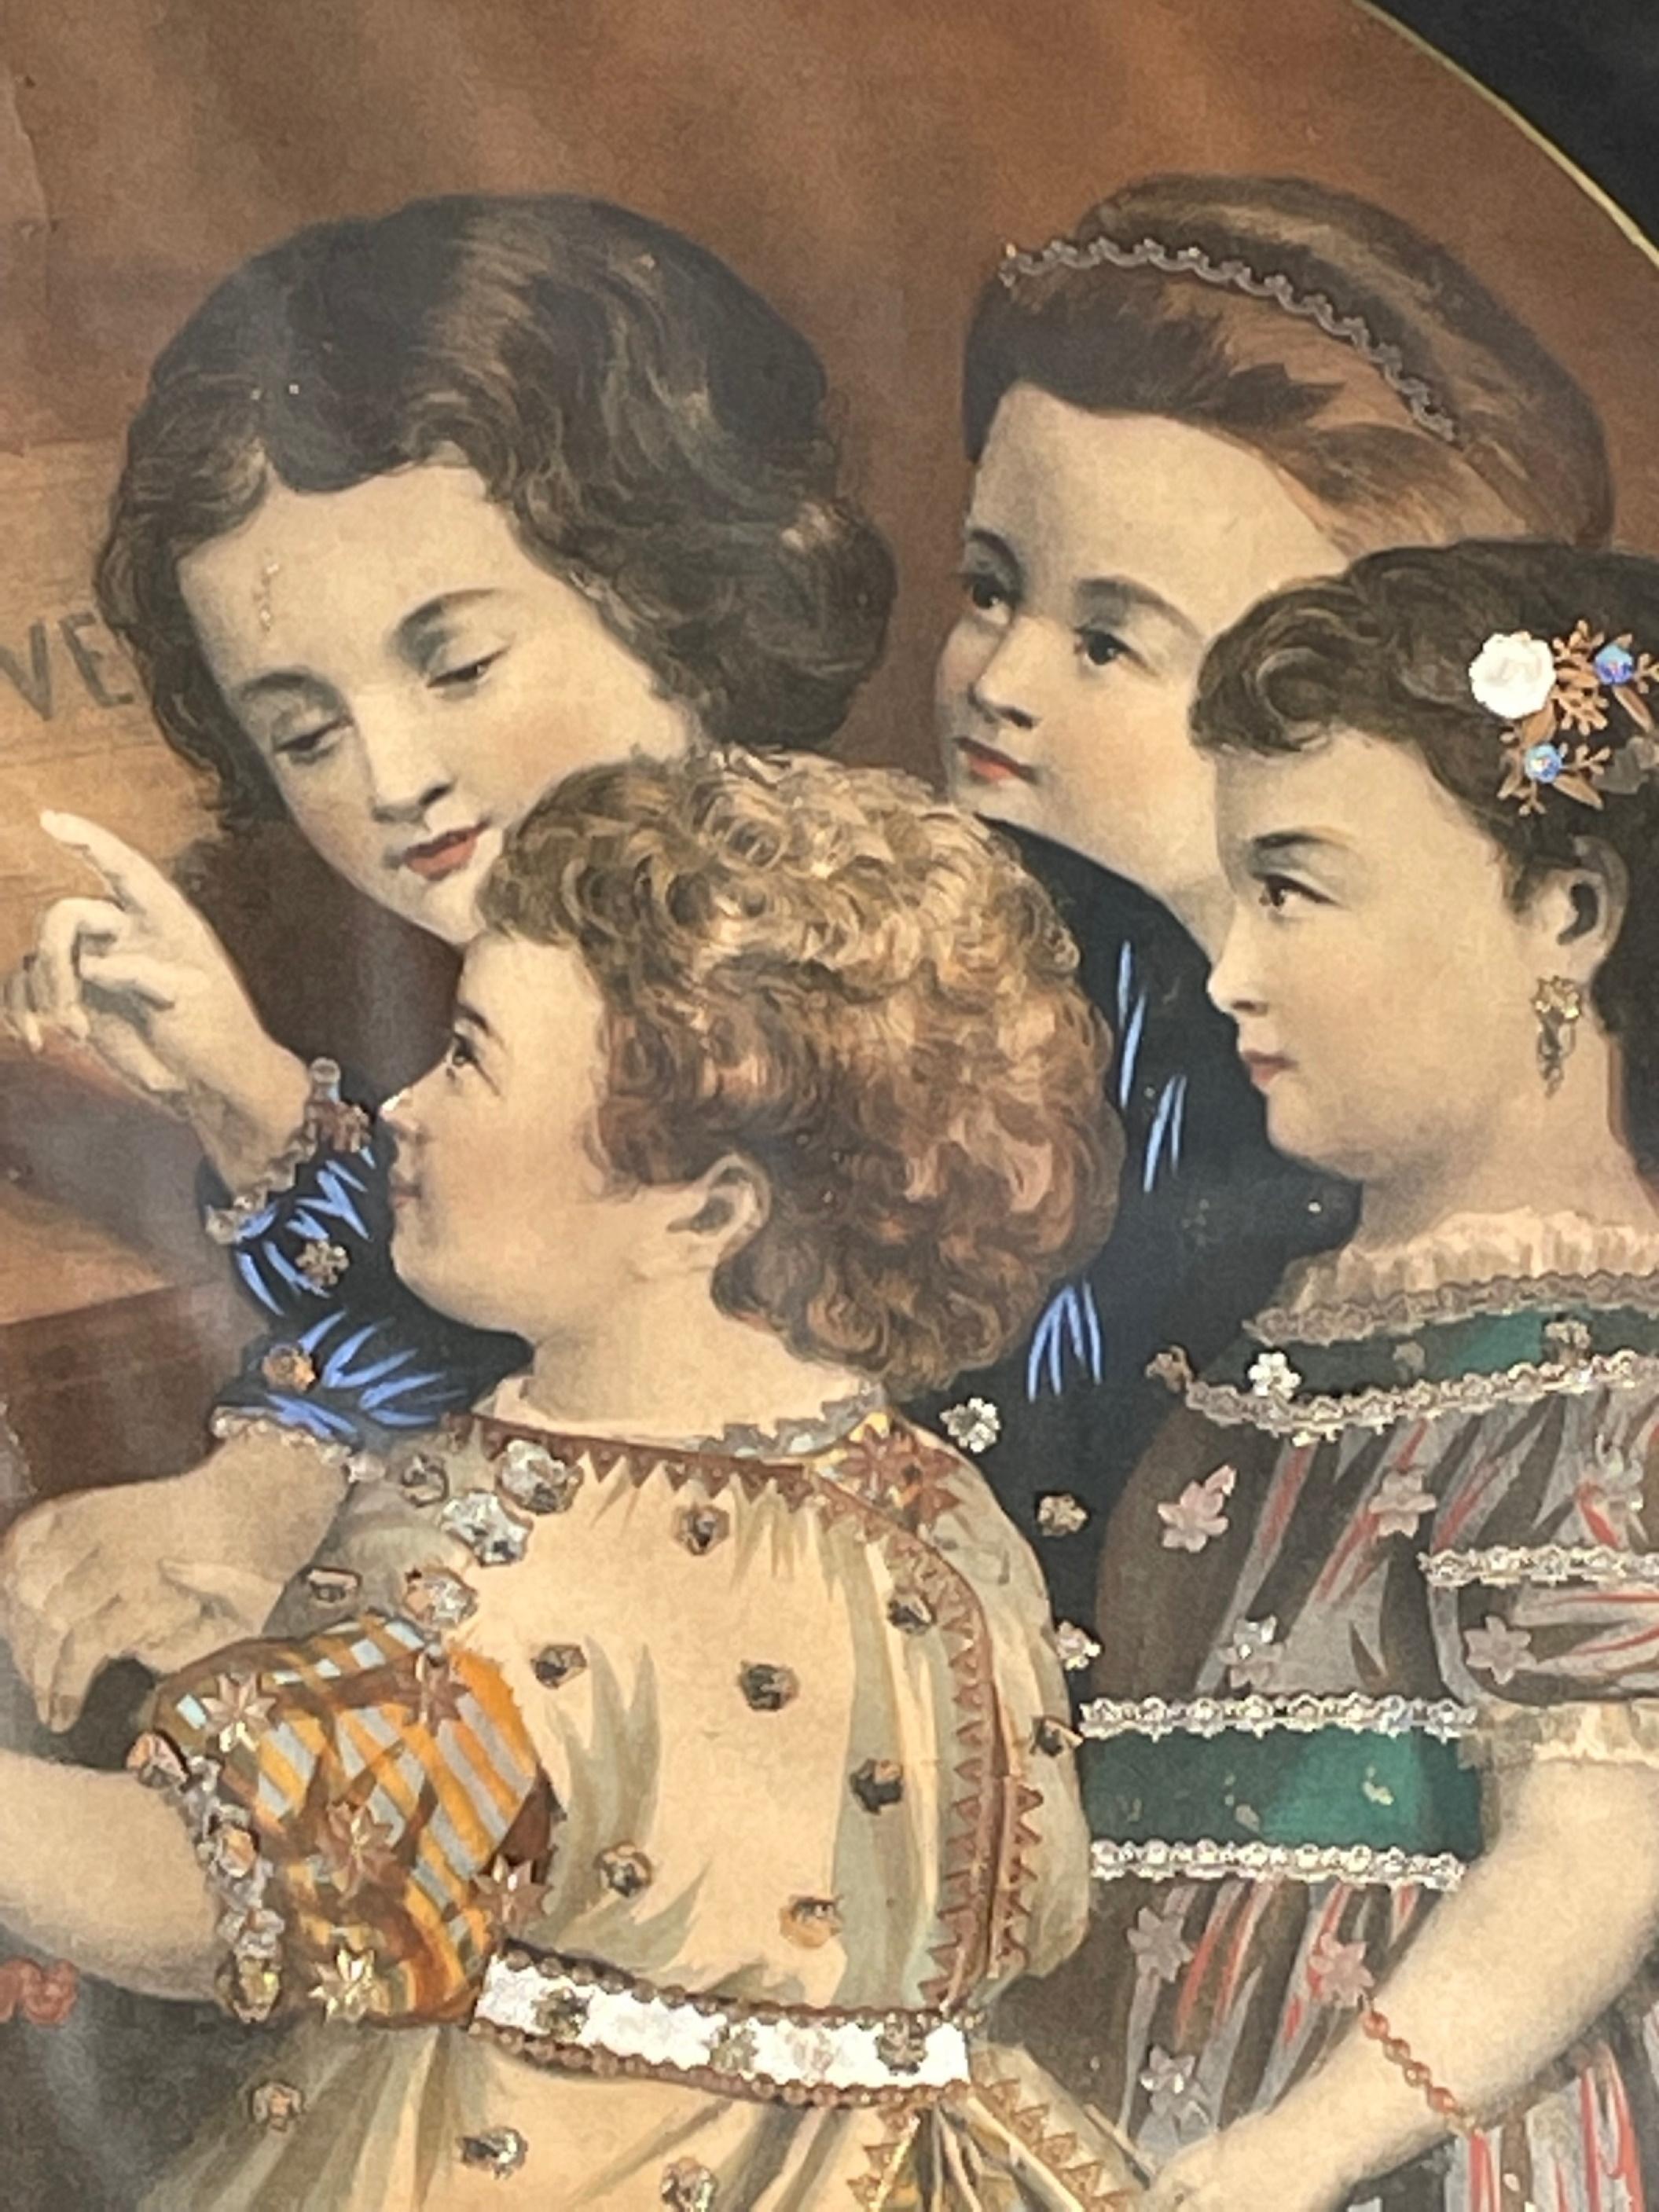 19th century Victorian hand colored lithograph in original frame. Large and rare folio

Beautiful original hand colored print of four girls titled, “God is love”. It is embellished with gold stars and ribbons. The lithograph is housed in a period